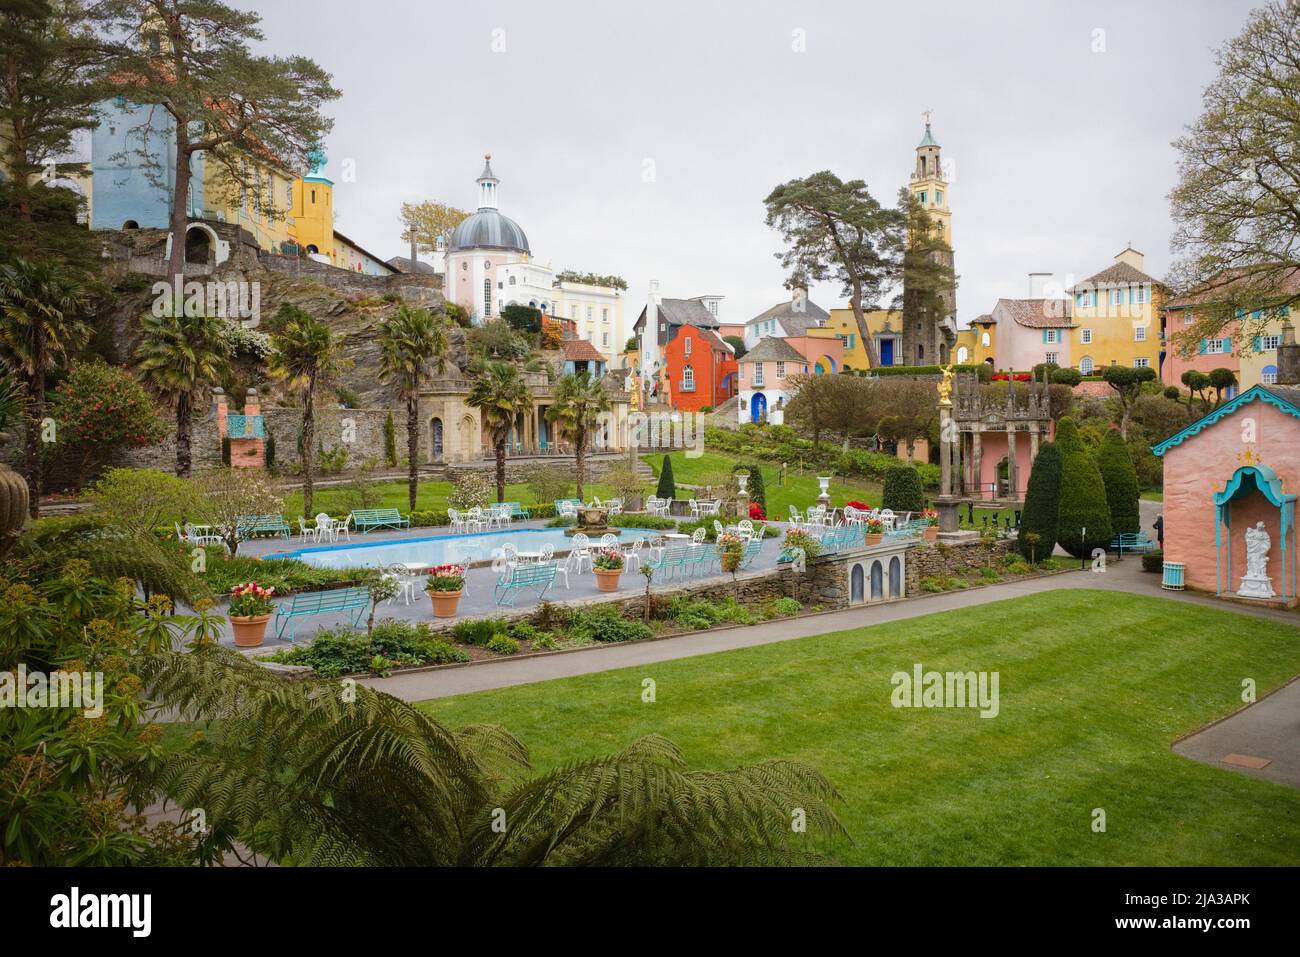 An evening view of Portmeirion village without no people Stock Photo